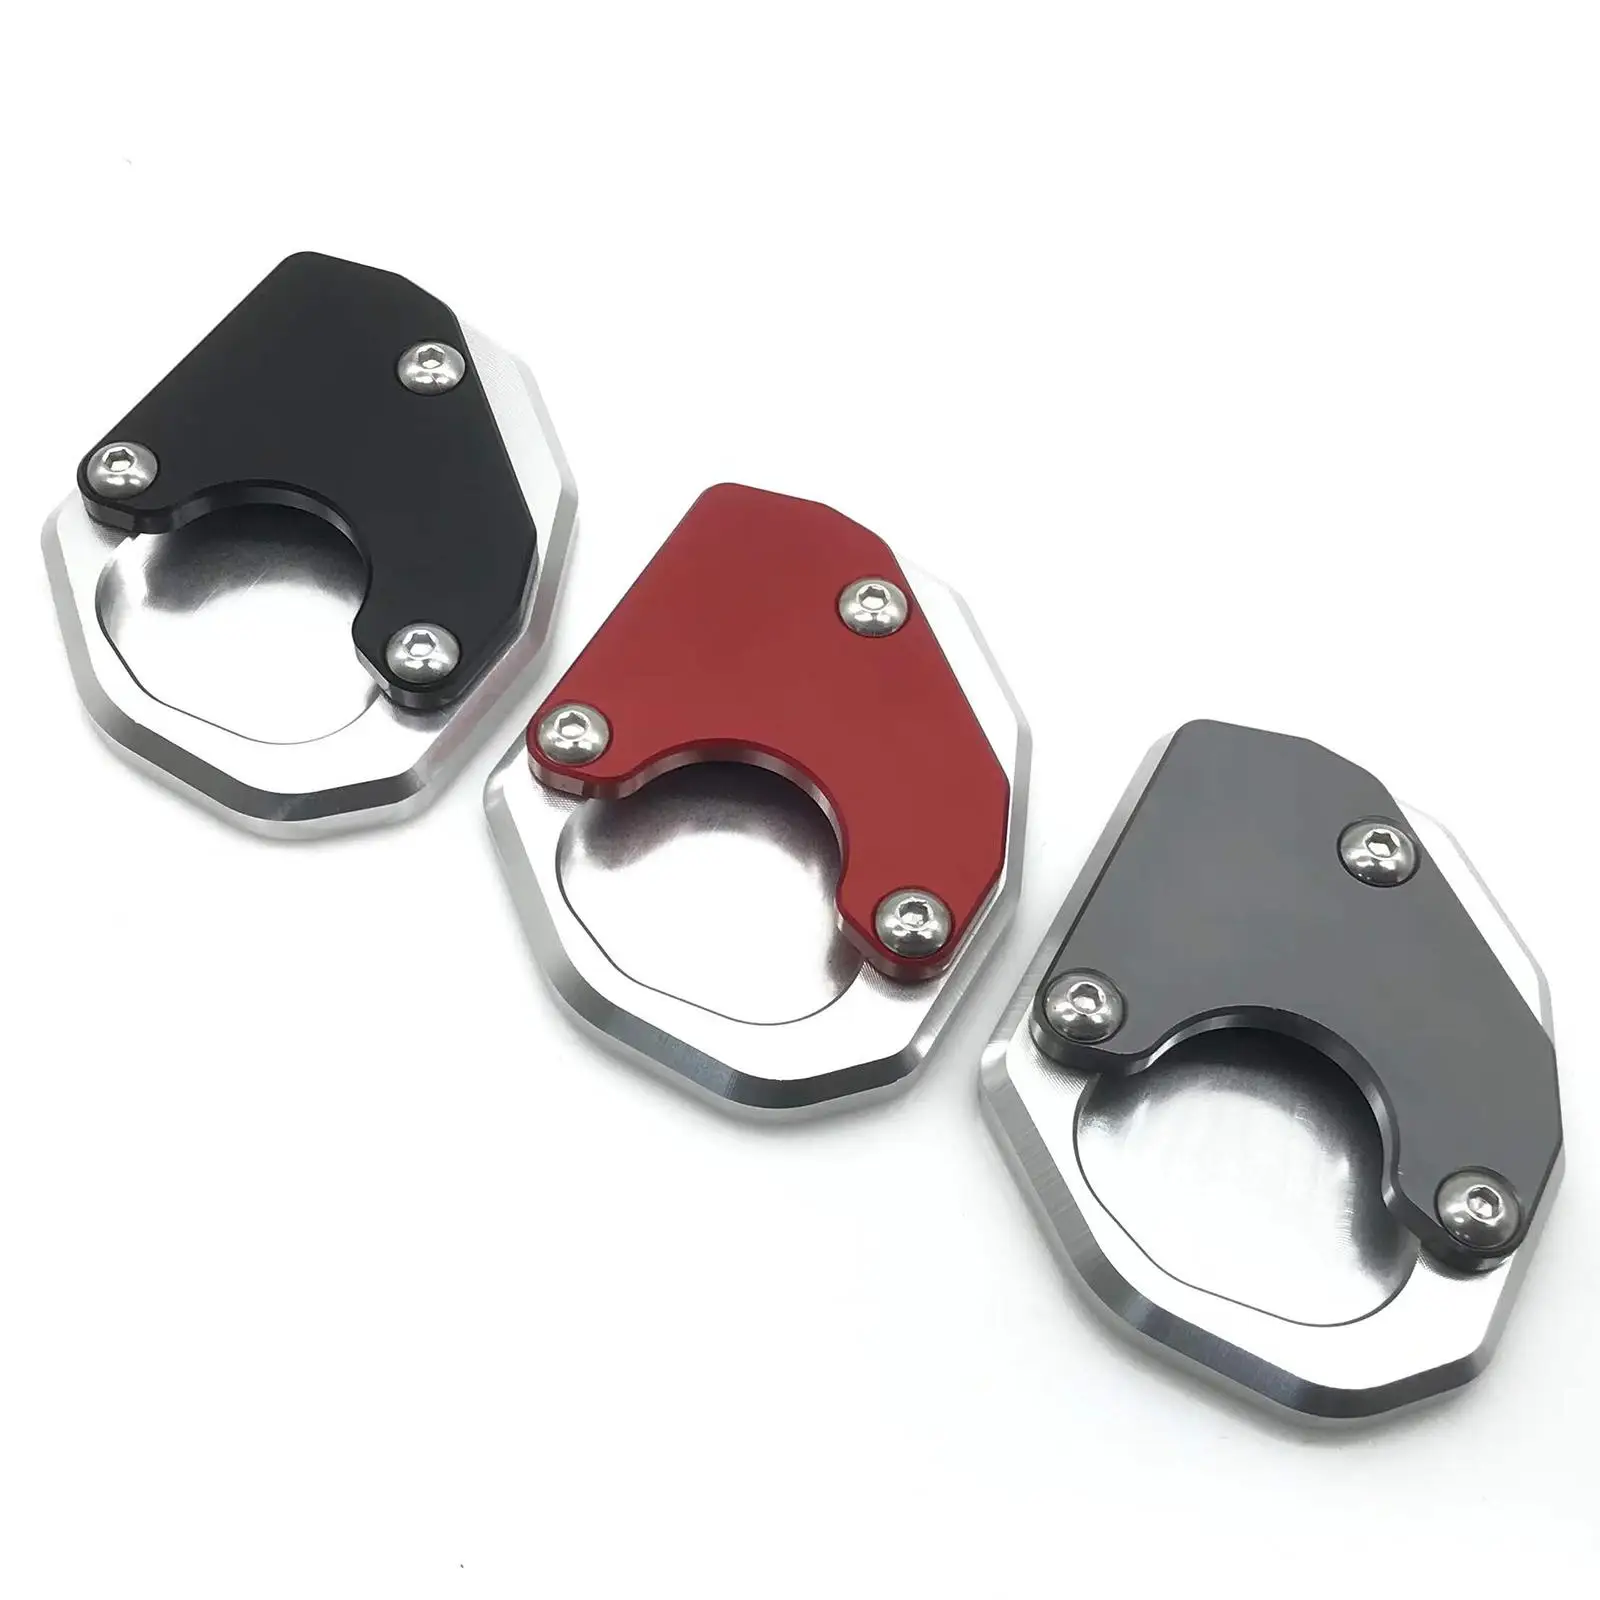 Kickstand Extension Pad Aluminum Alloy Enlarger Parts Foot Side Stand Enlarger Plate Enlarge Plate for 